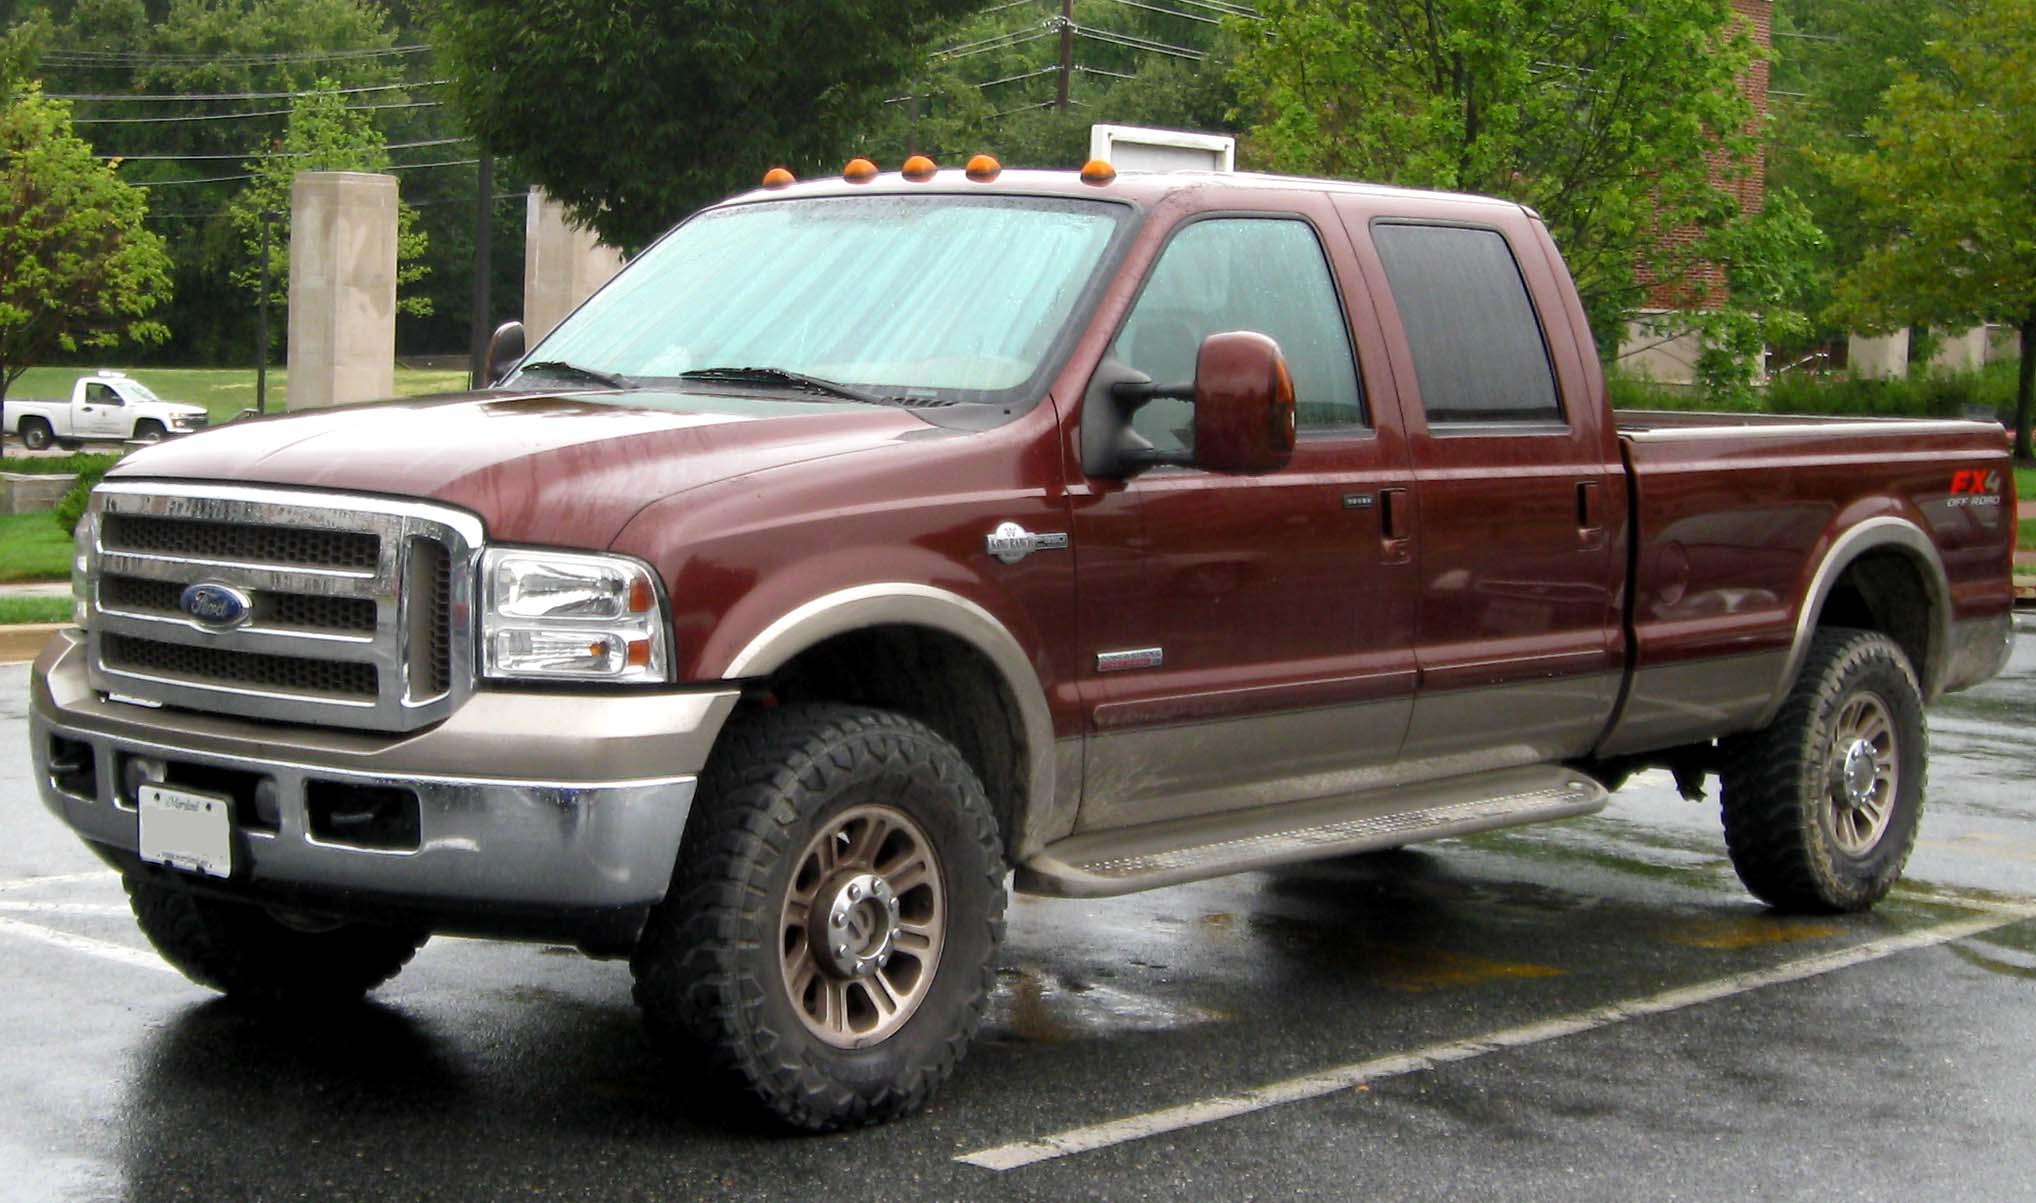 Ford F-250 Lariat Super Duty FX-4 King Ranch edition